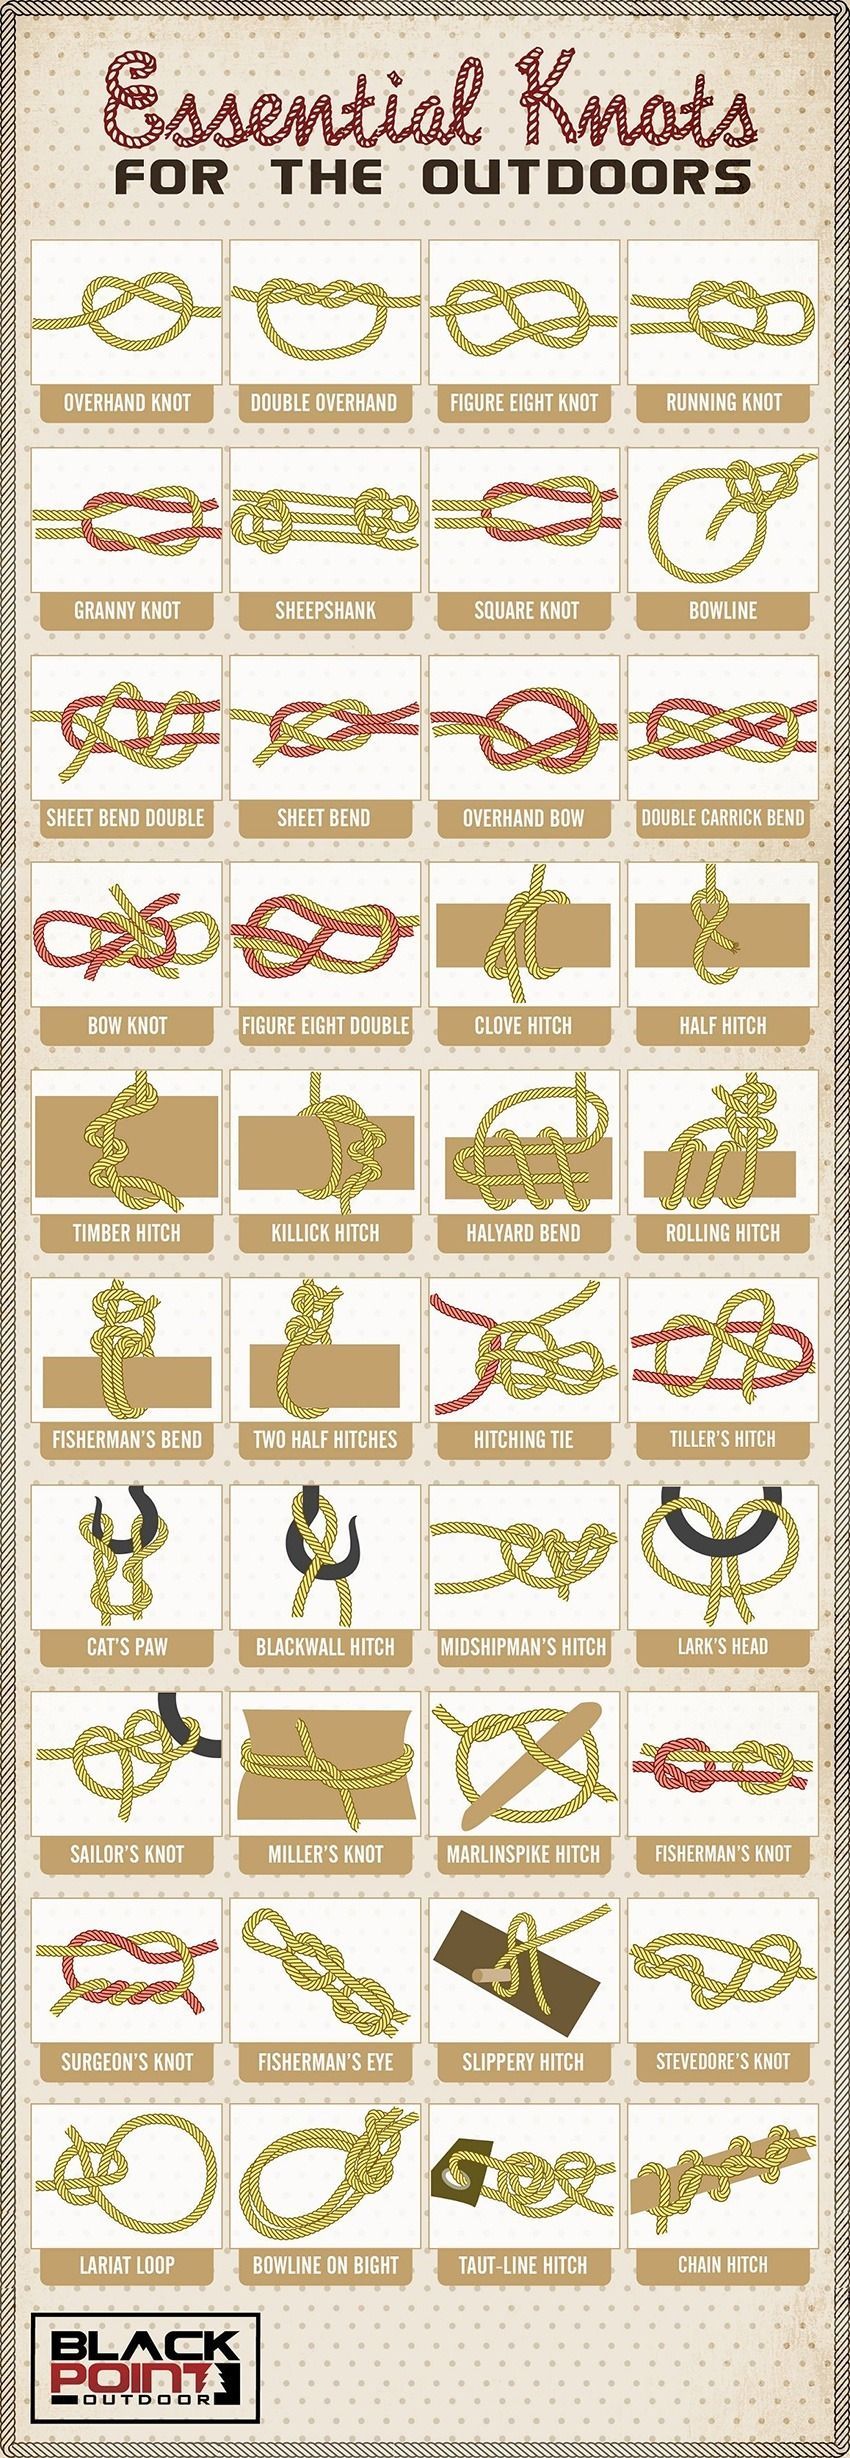 These knots, all 40 of them, will add a lot to your knowledge rank. All outdoorsmen should know these.